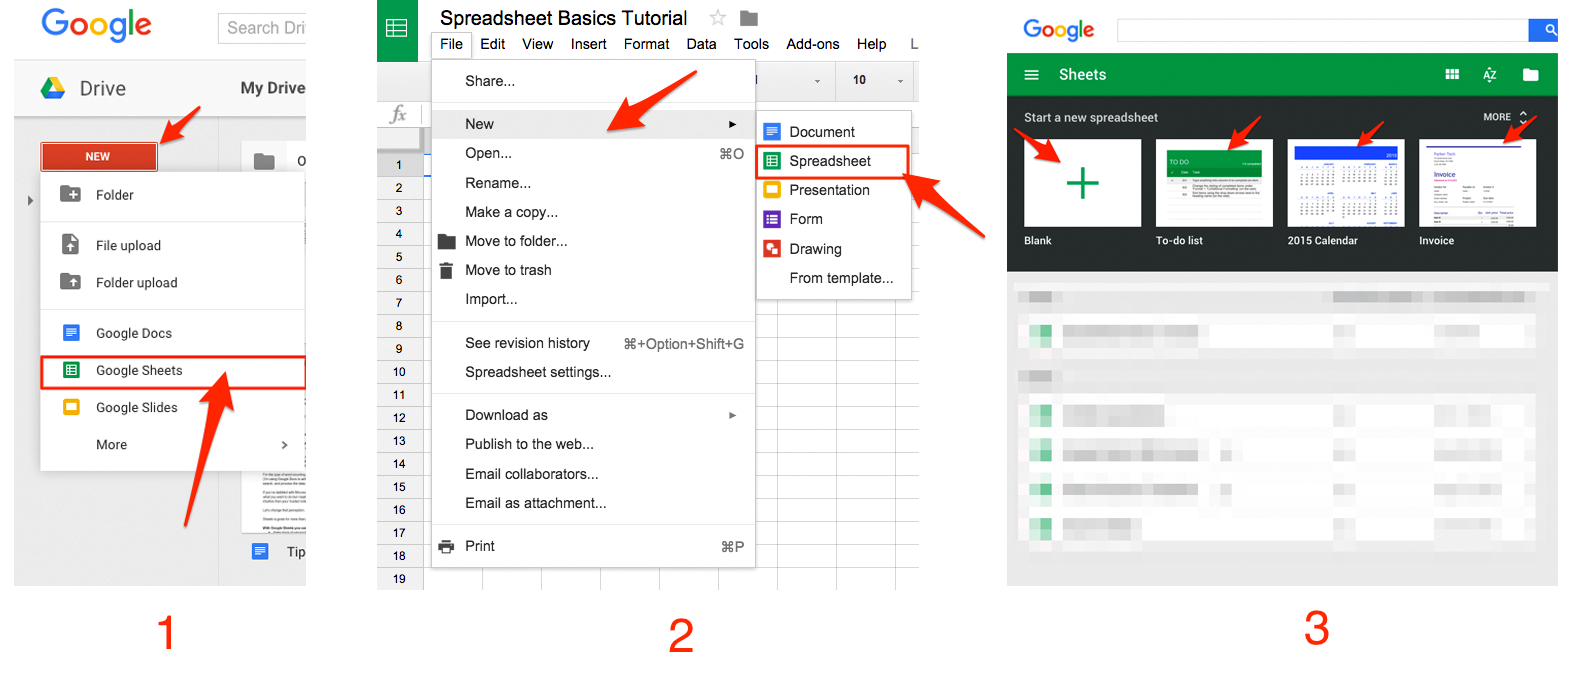 How To Use Spreadsheet Software For Google Sheets 101: The Beginner's Guide To Online Spreadsheets  The